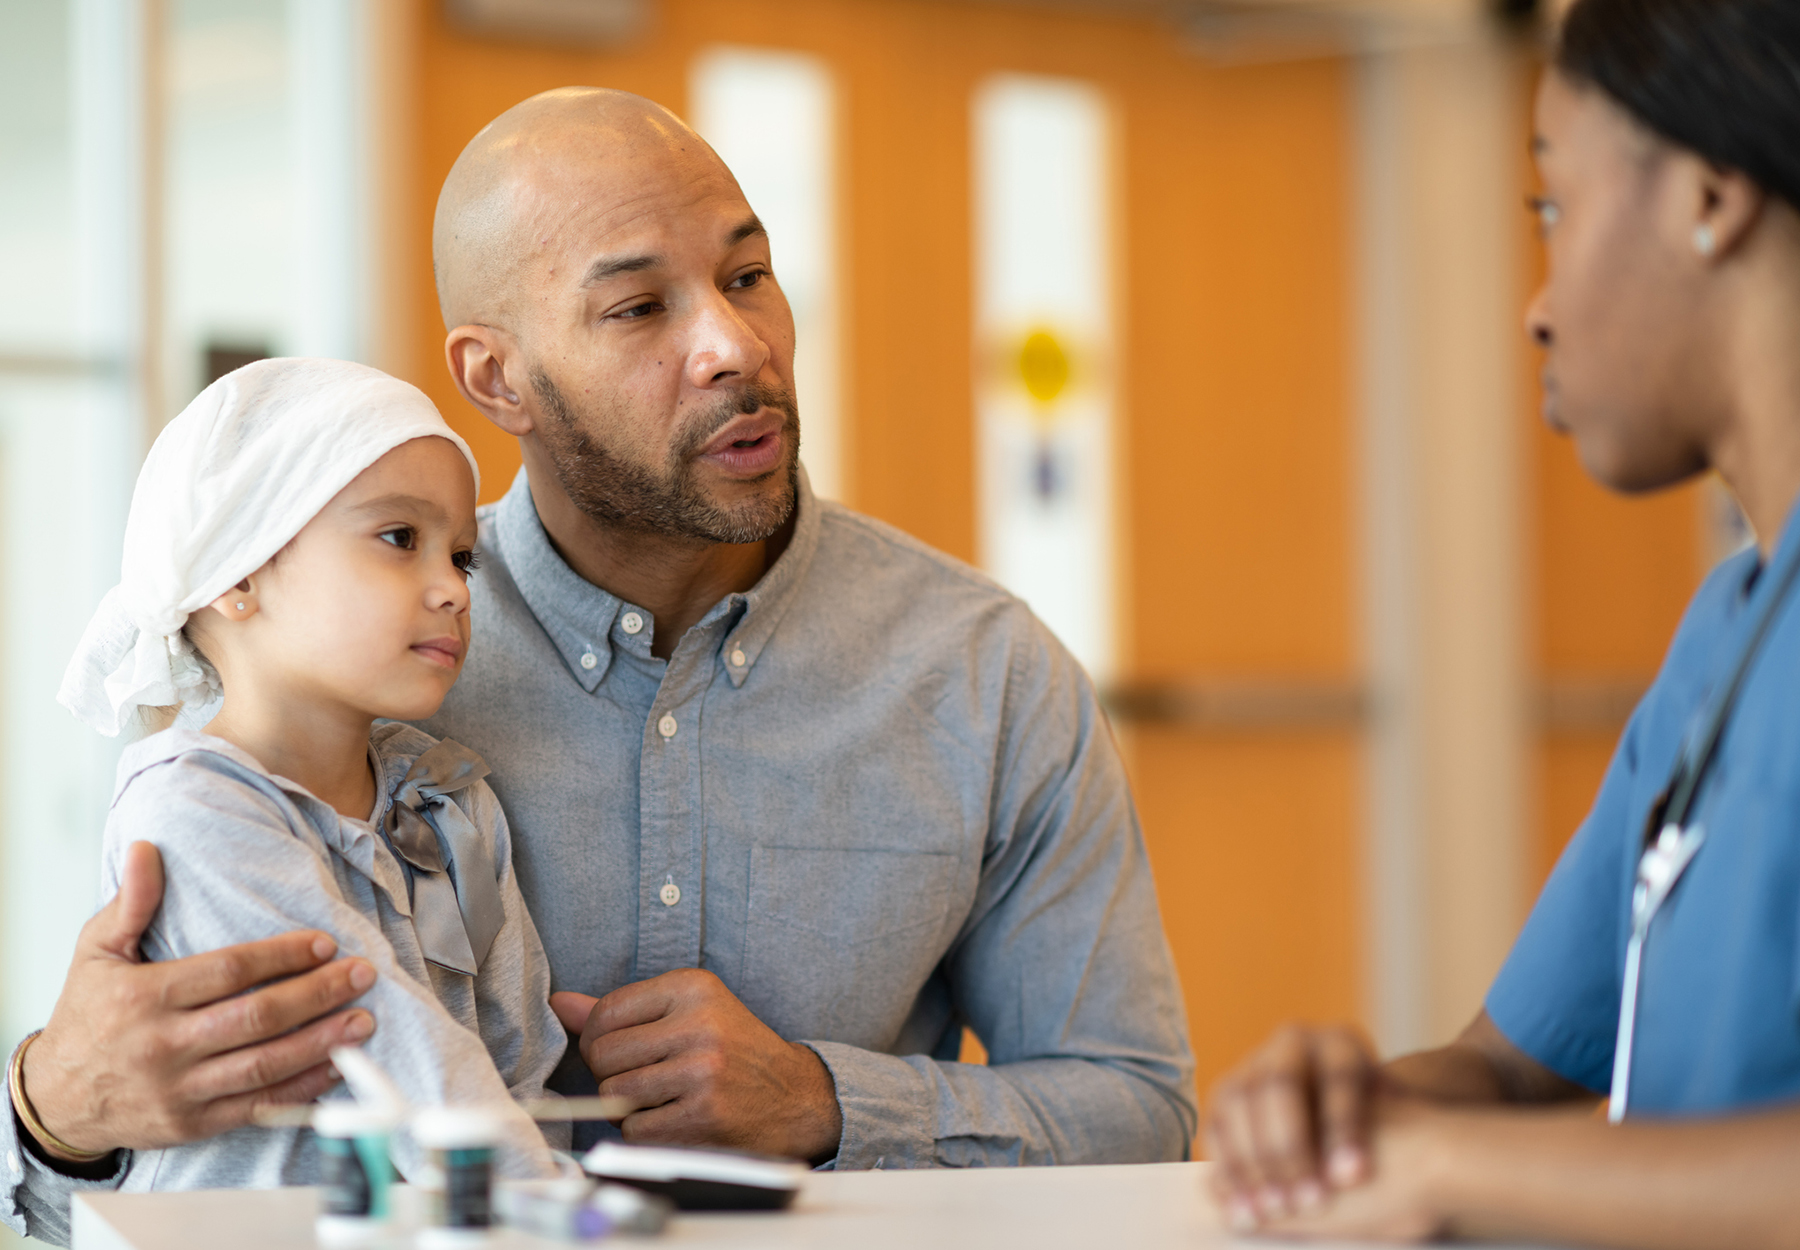 An African American father accompanies his young daughter to a medical appointment. His daughter has cancer and she is wearing s headscarf. The two are seated at a table across from a medical professional. The black female doctor is sharing information about the girl's course of treatment. Stock photo.